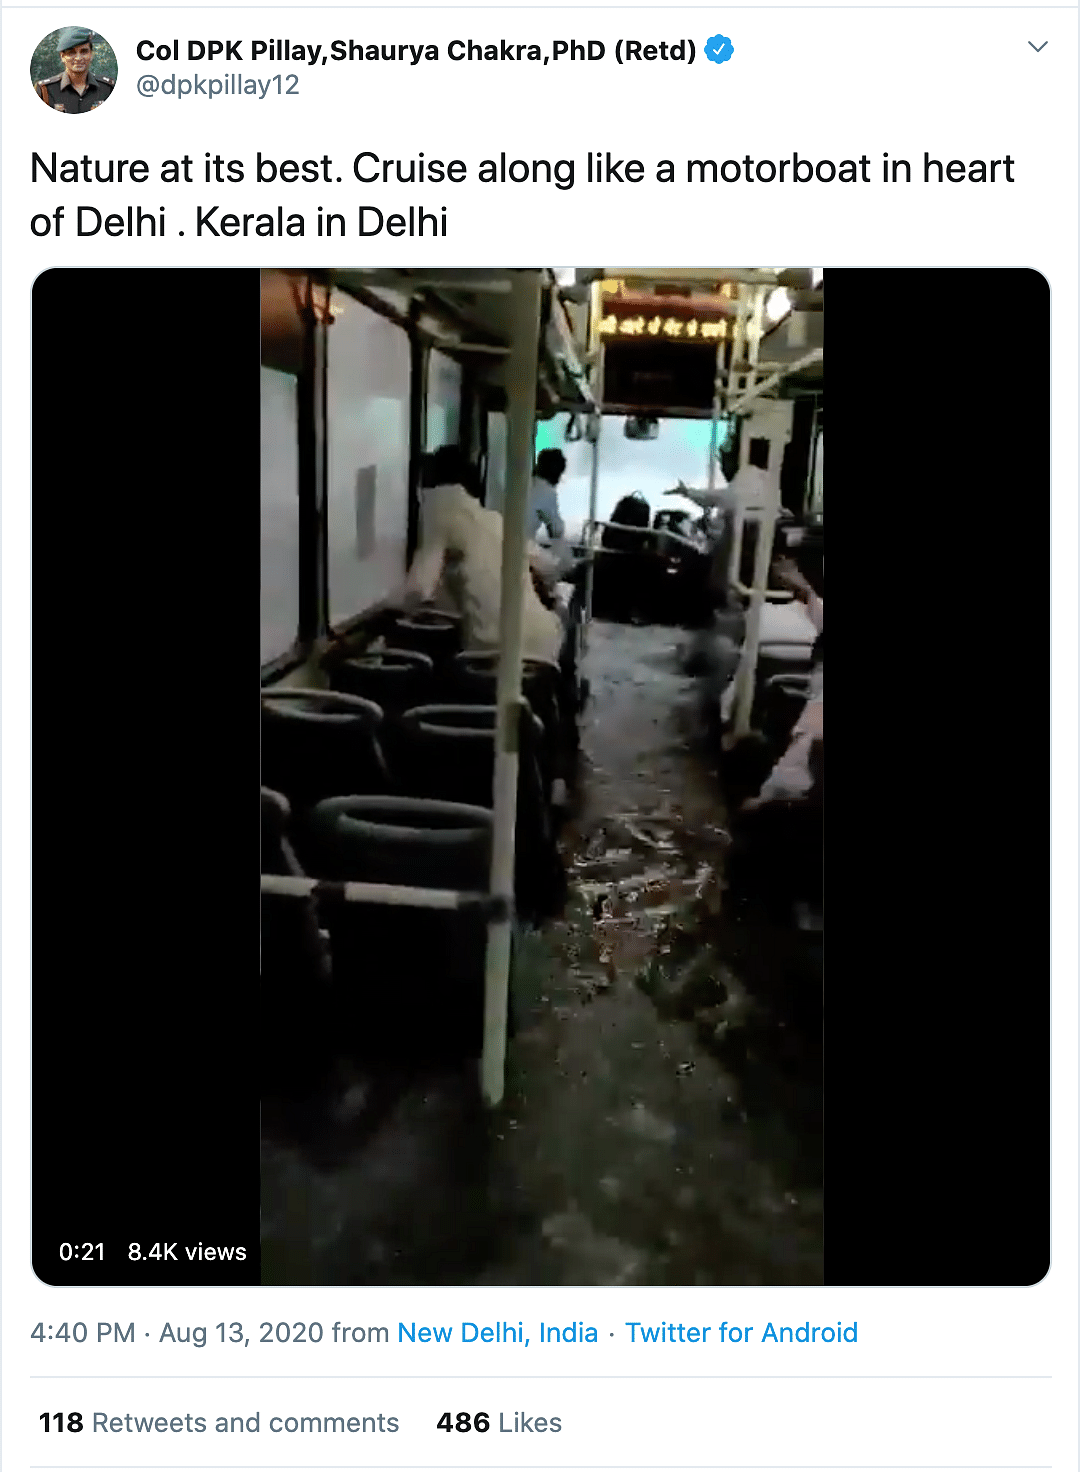 We found out that the video is from Jaipur, Rajasthan and not Delhi as claimed.